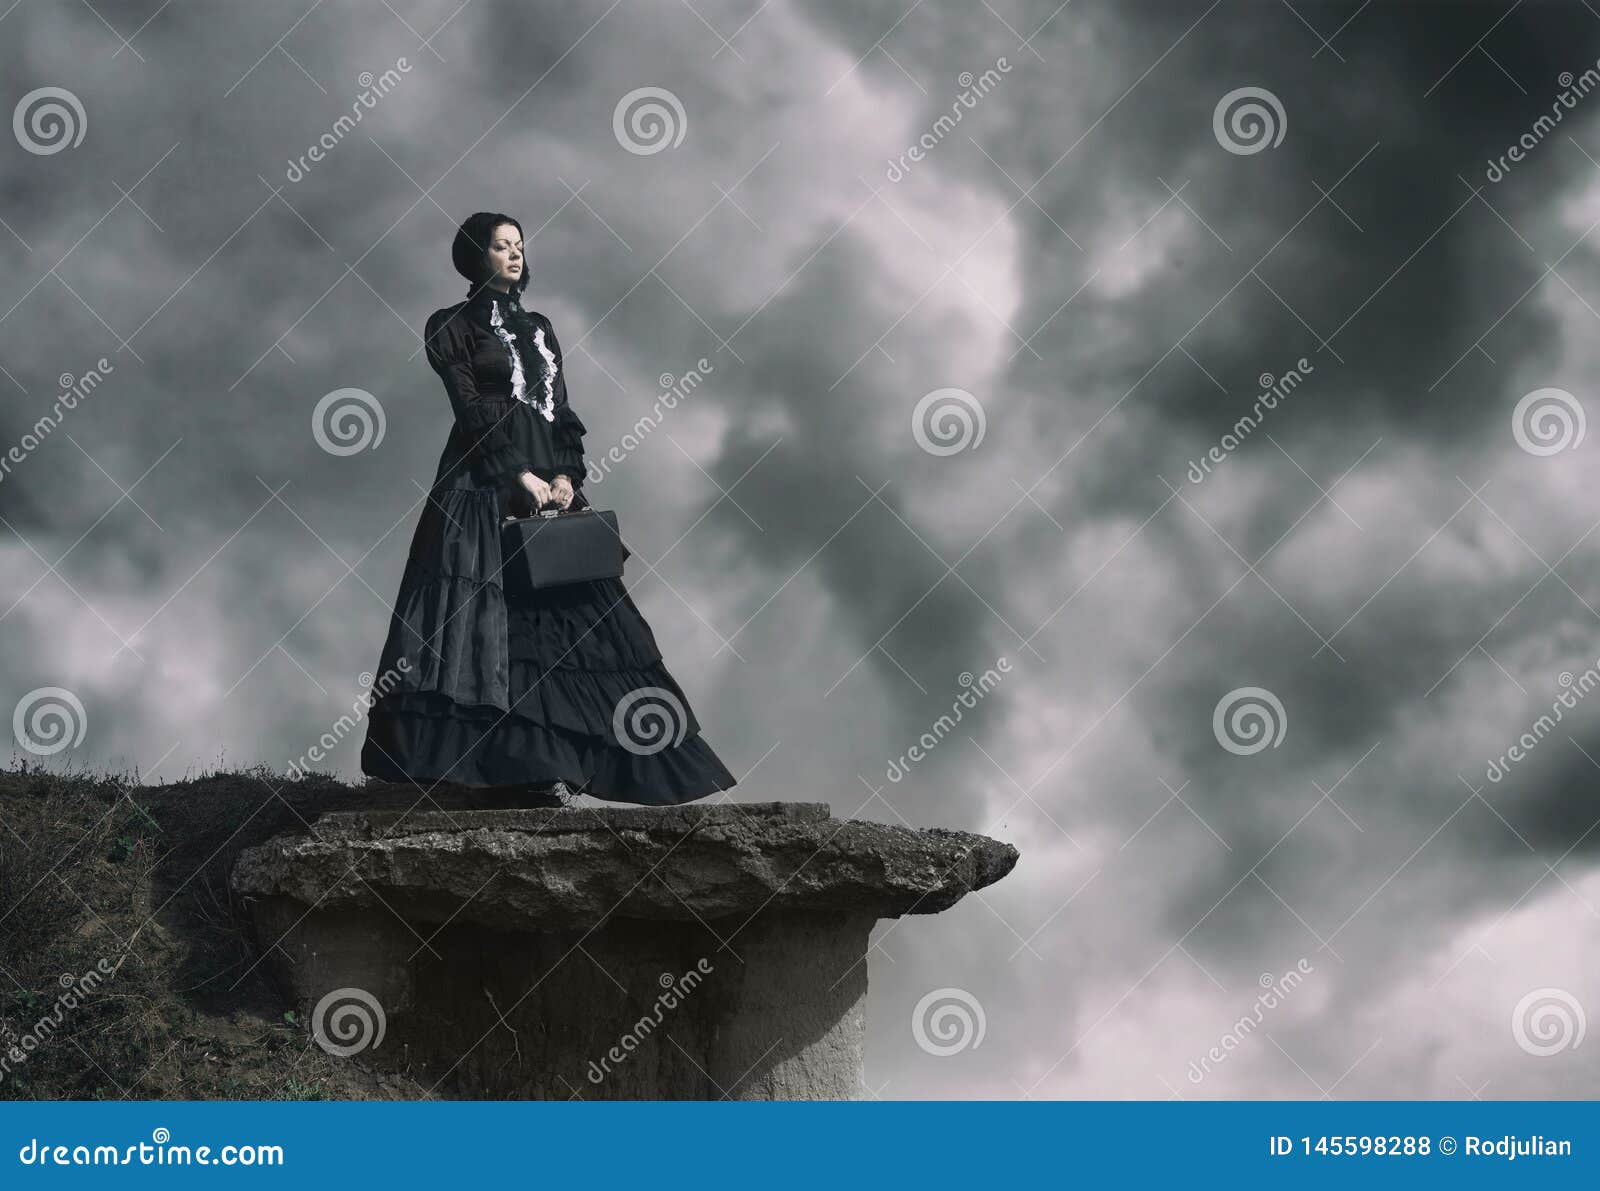 outdoors portrait of a victorian lady in black standing on the cliff